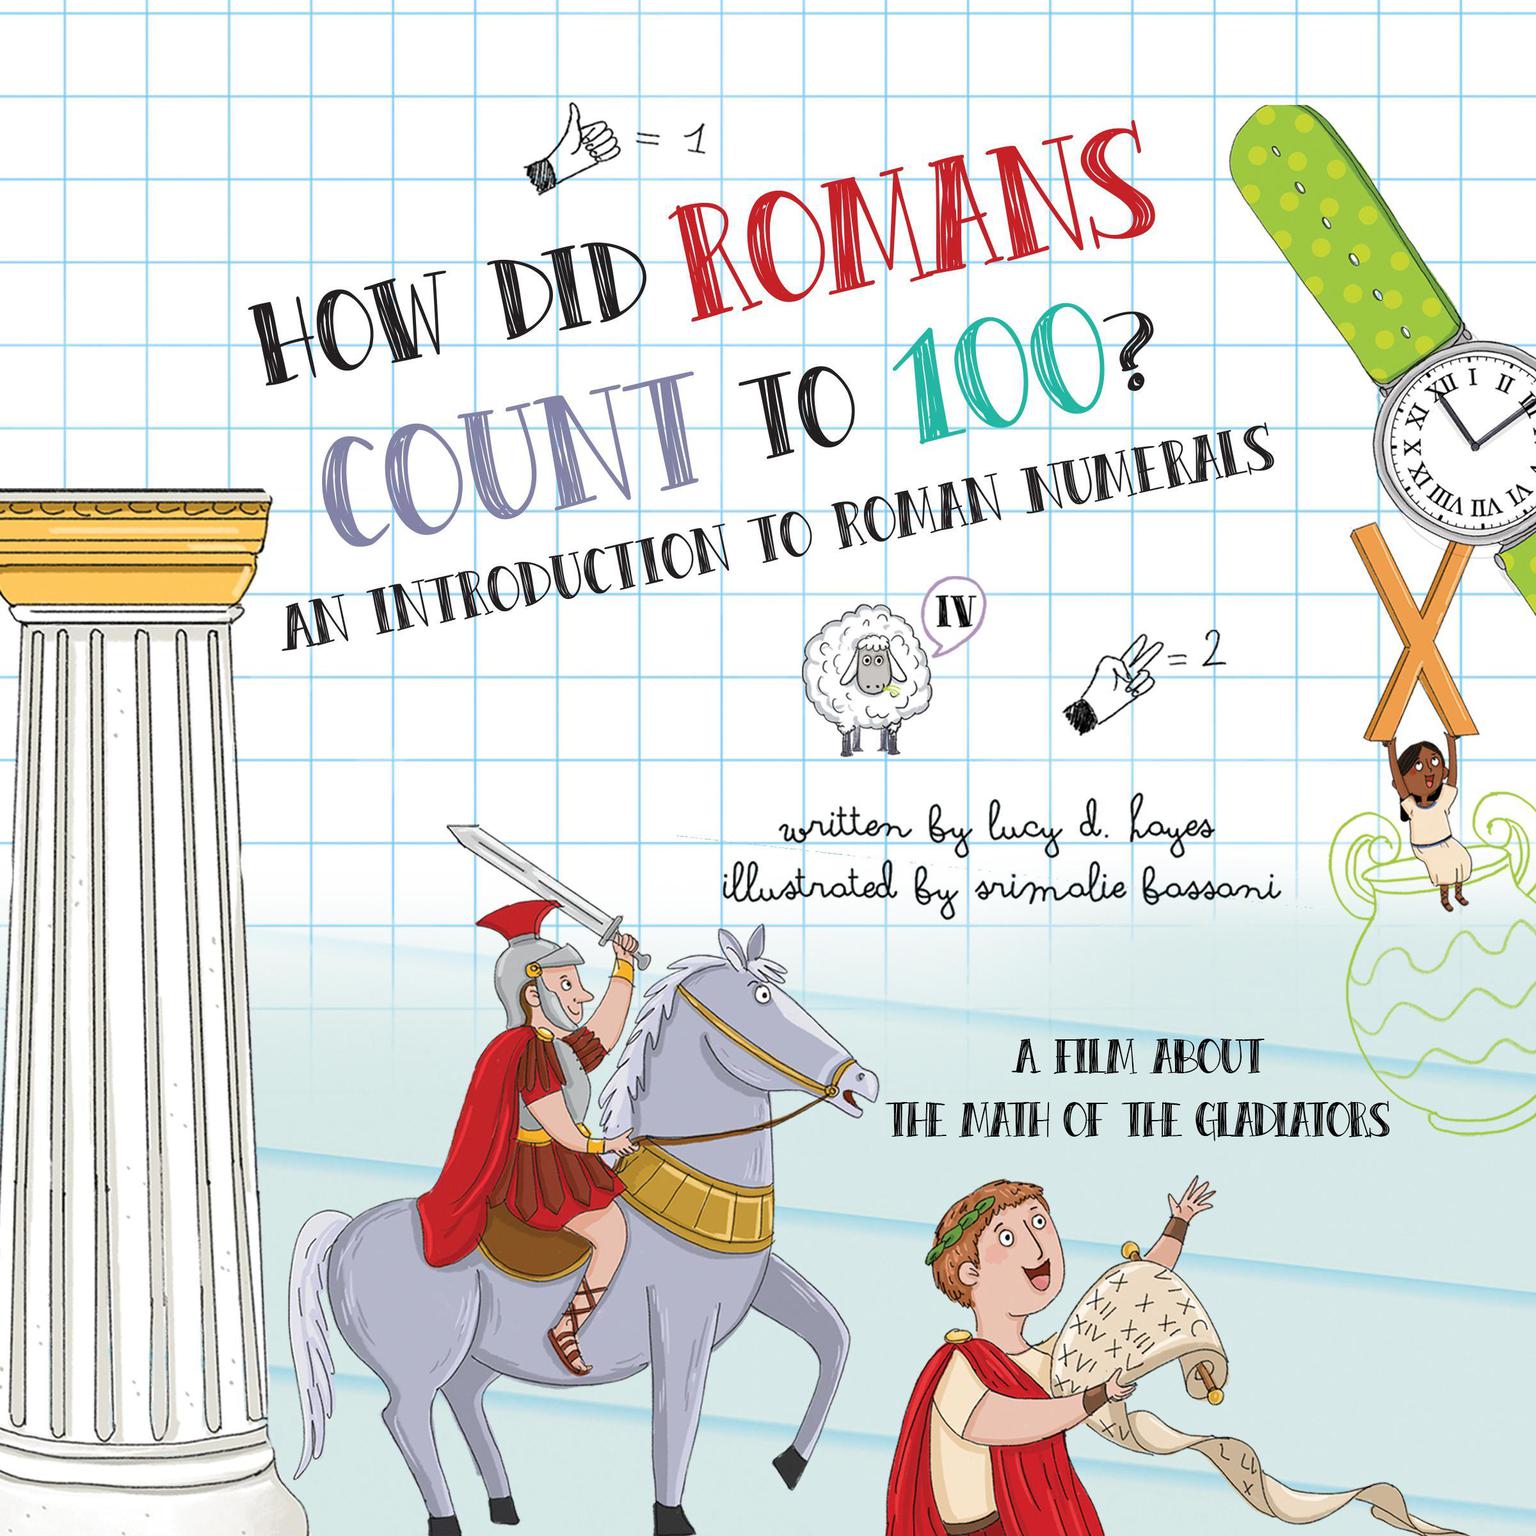 How Did Romans Count to 100? An Introduction to Roman Numerals: An Audiobook About the Math of the Gladiators Audiobook, by Lucy D. Hayes